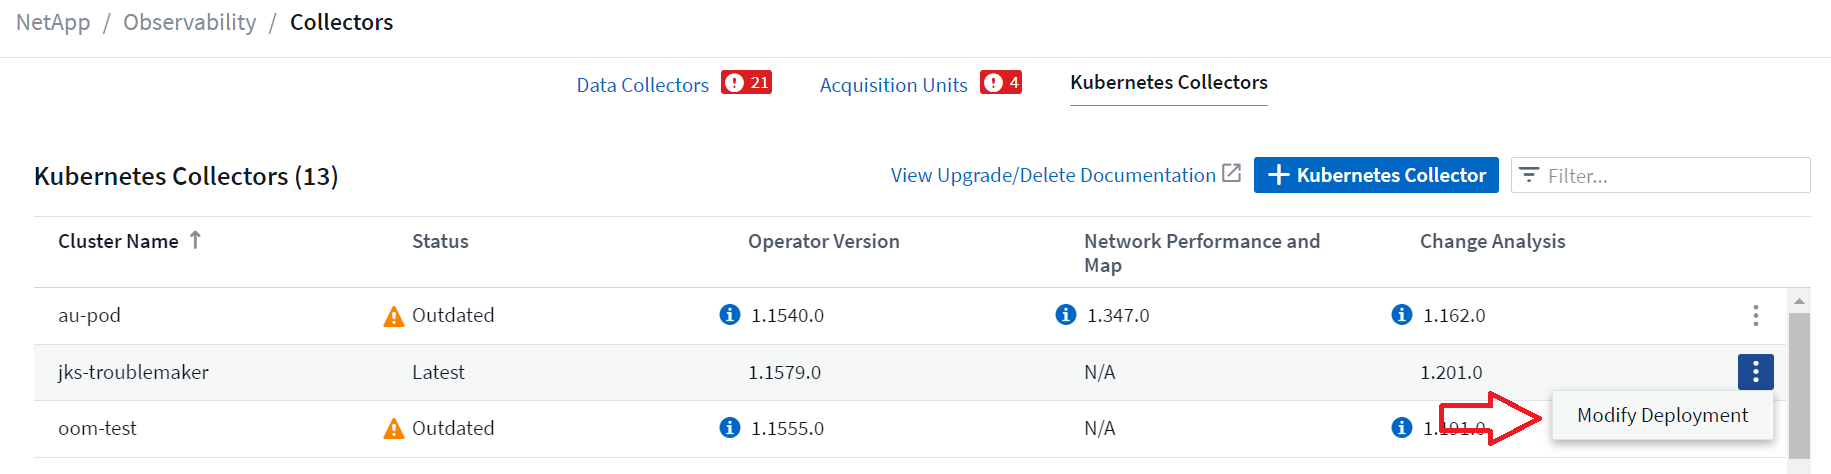 Modify deployment Menu on Kubernetes Collector list page